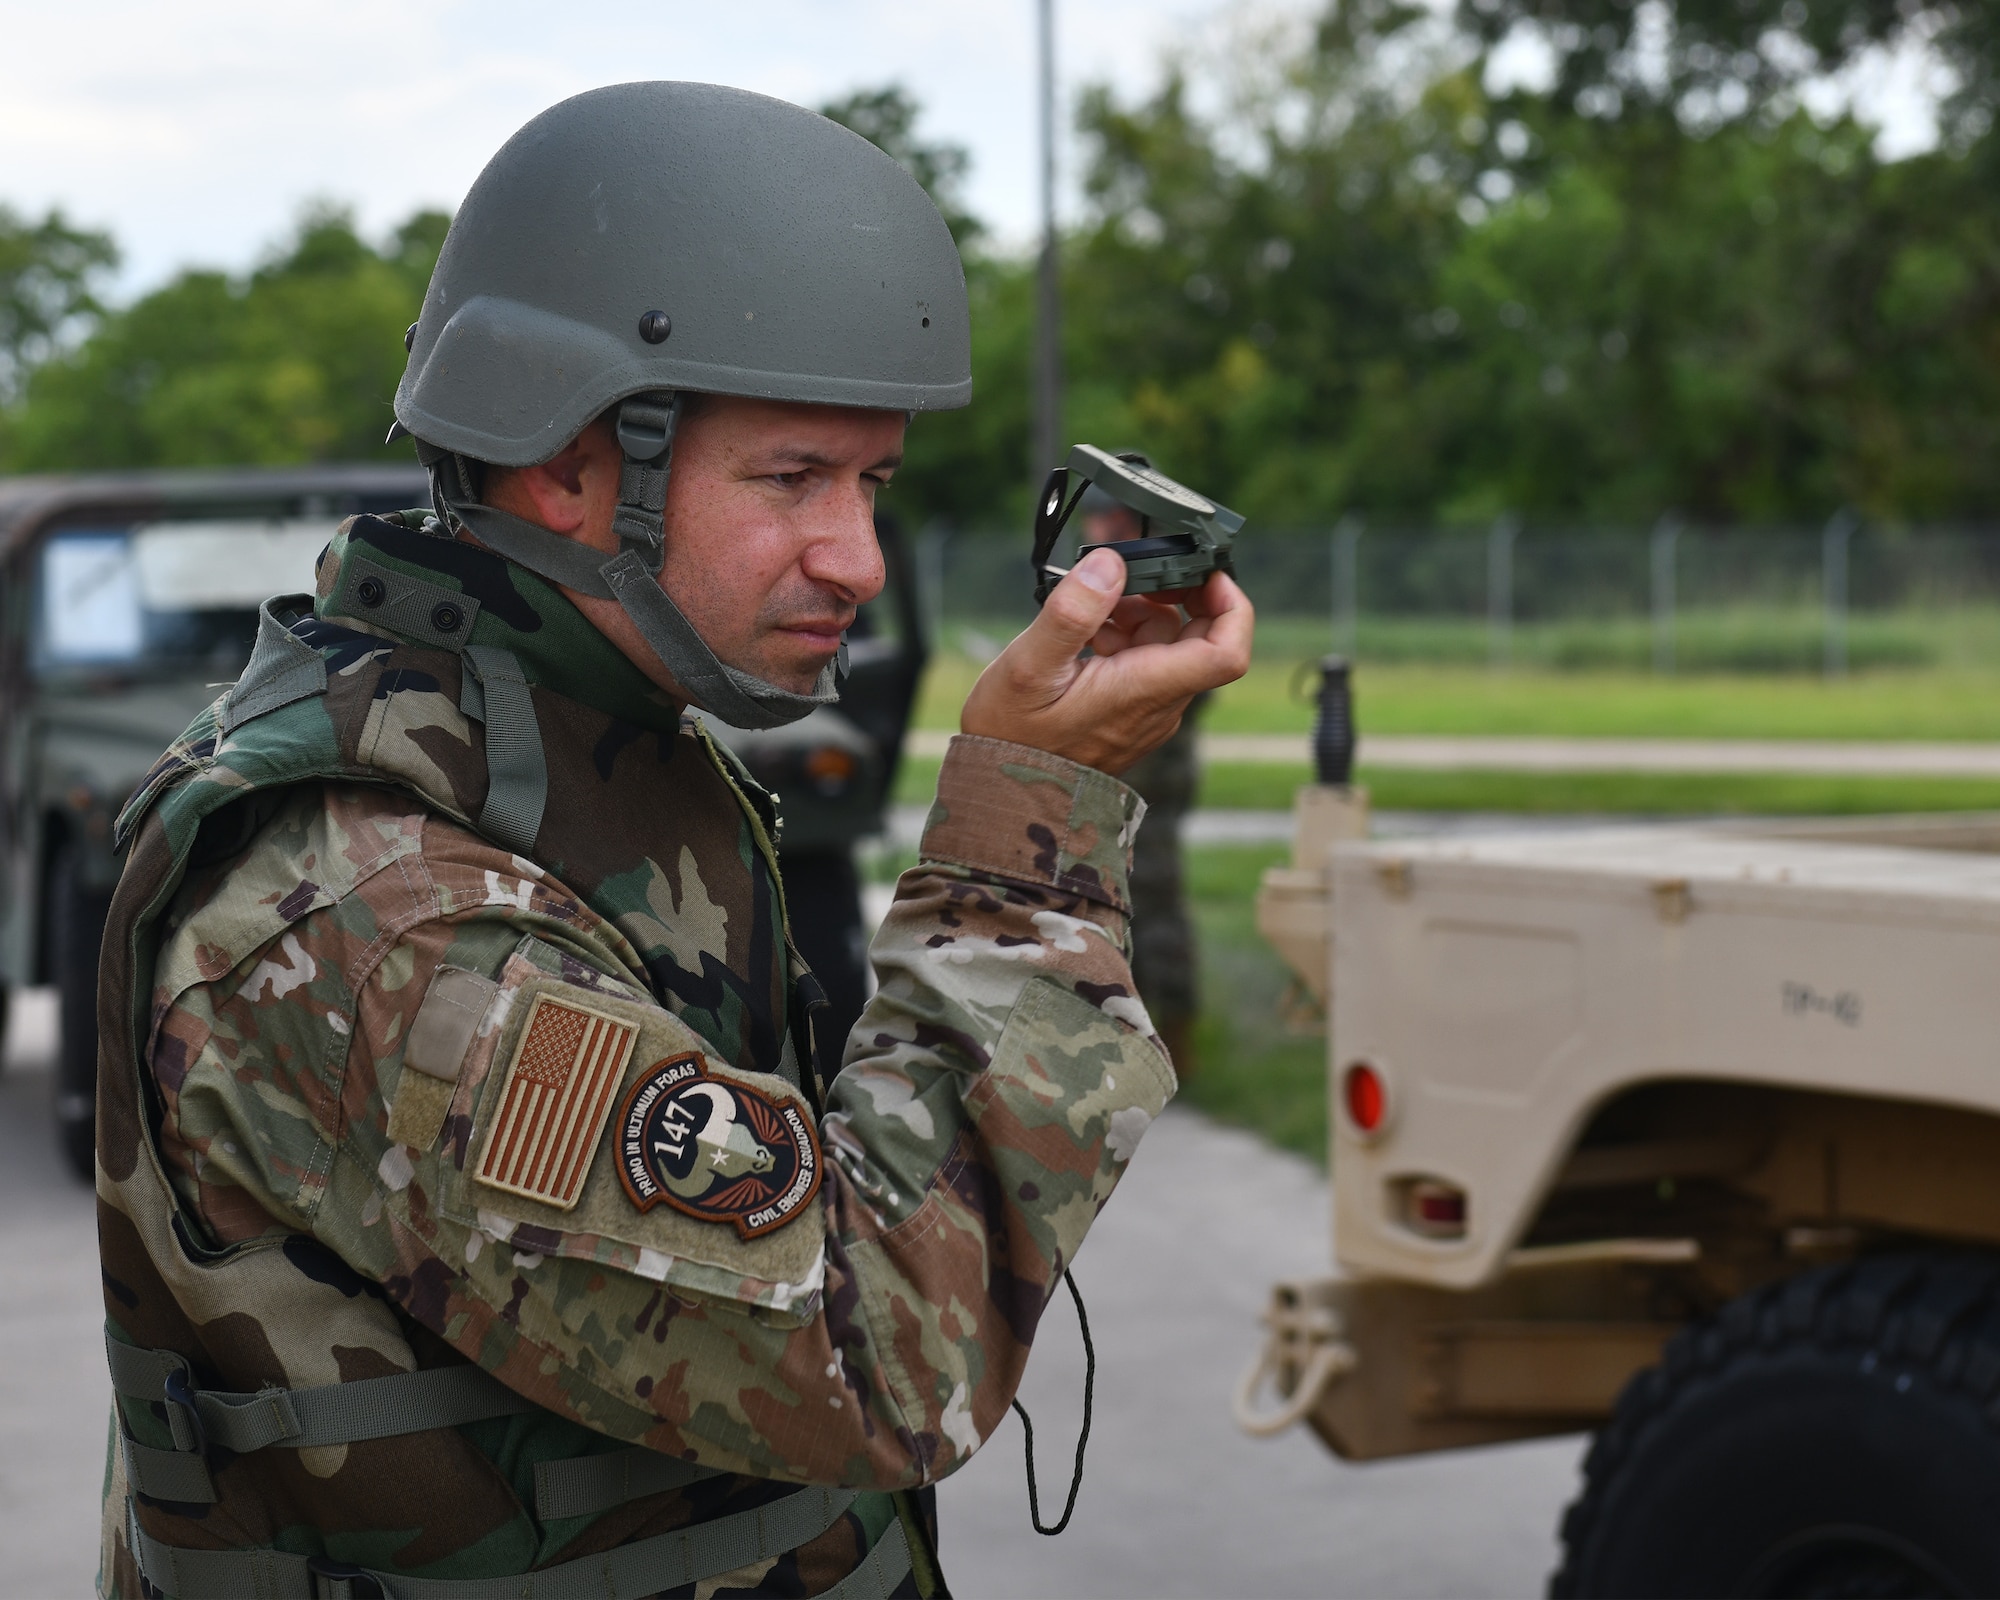 CE Airman uses a compass during an exercise